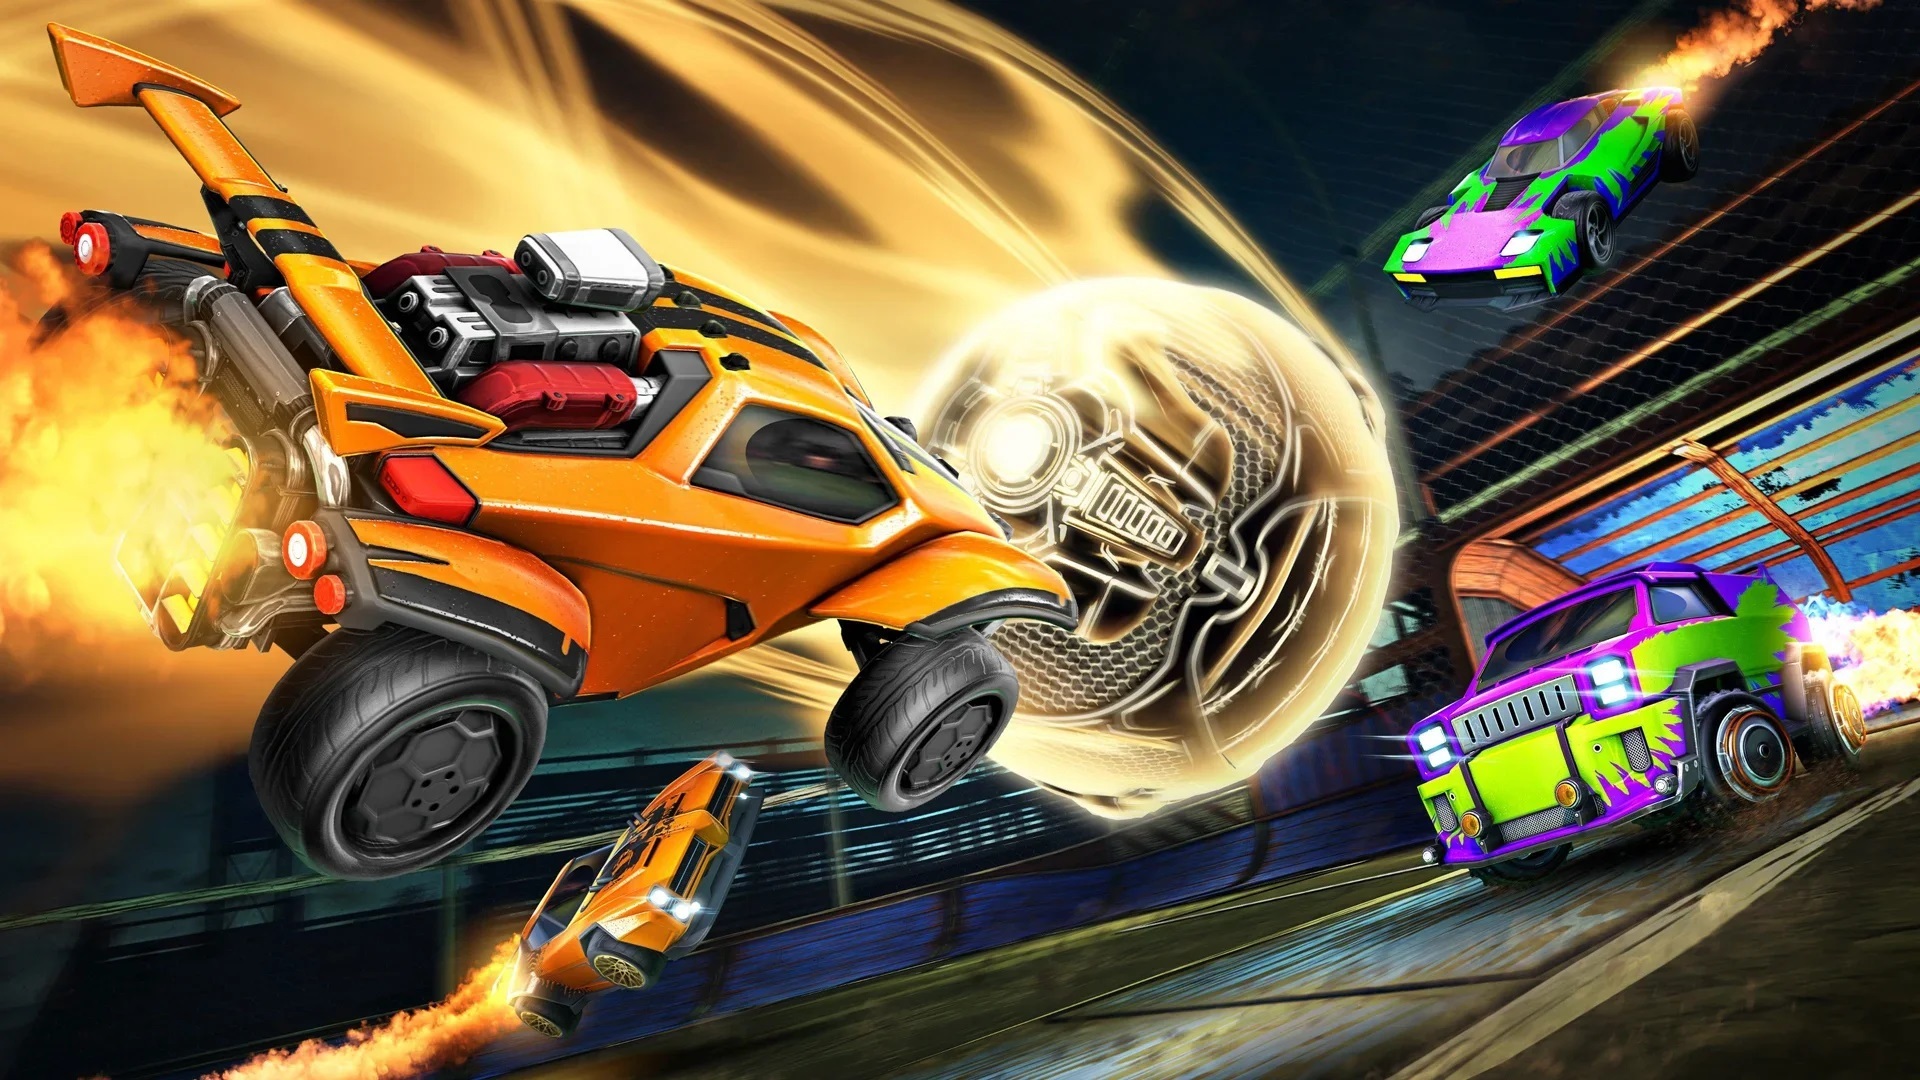 The Cars-Themed Lightning McQueen Mega Bundle Has Arrived In Rocket League